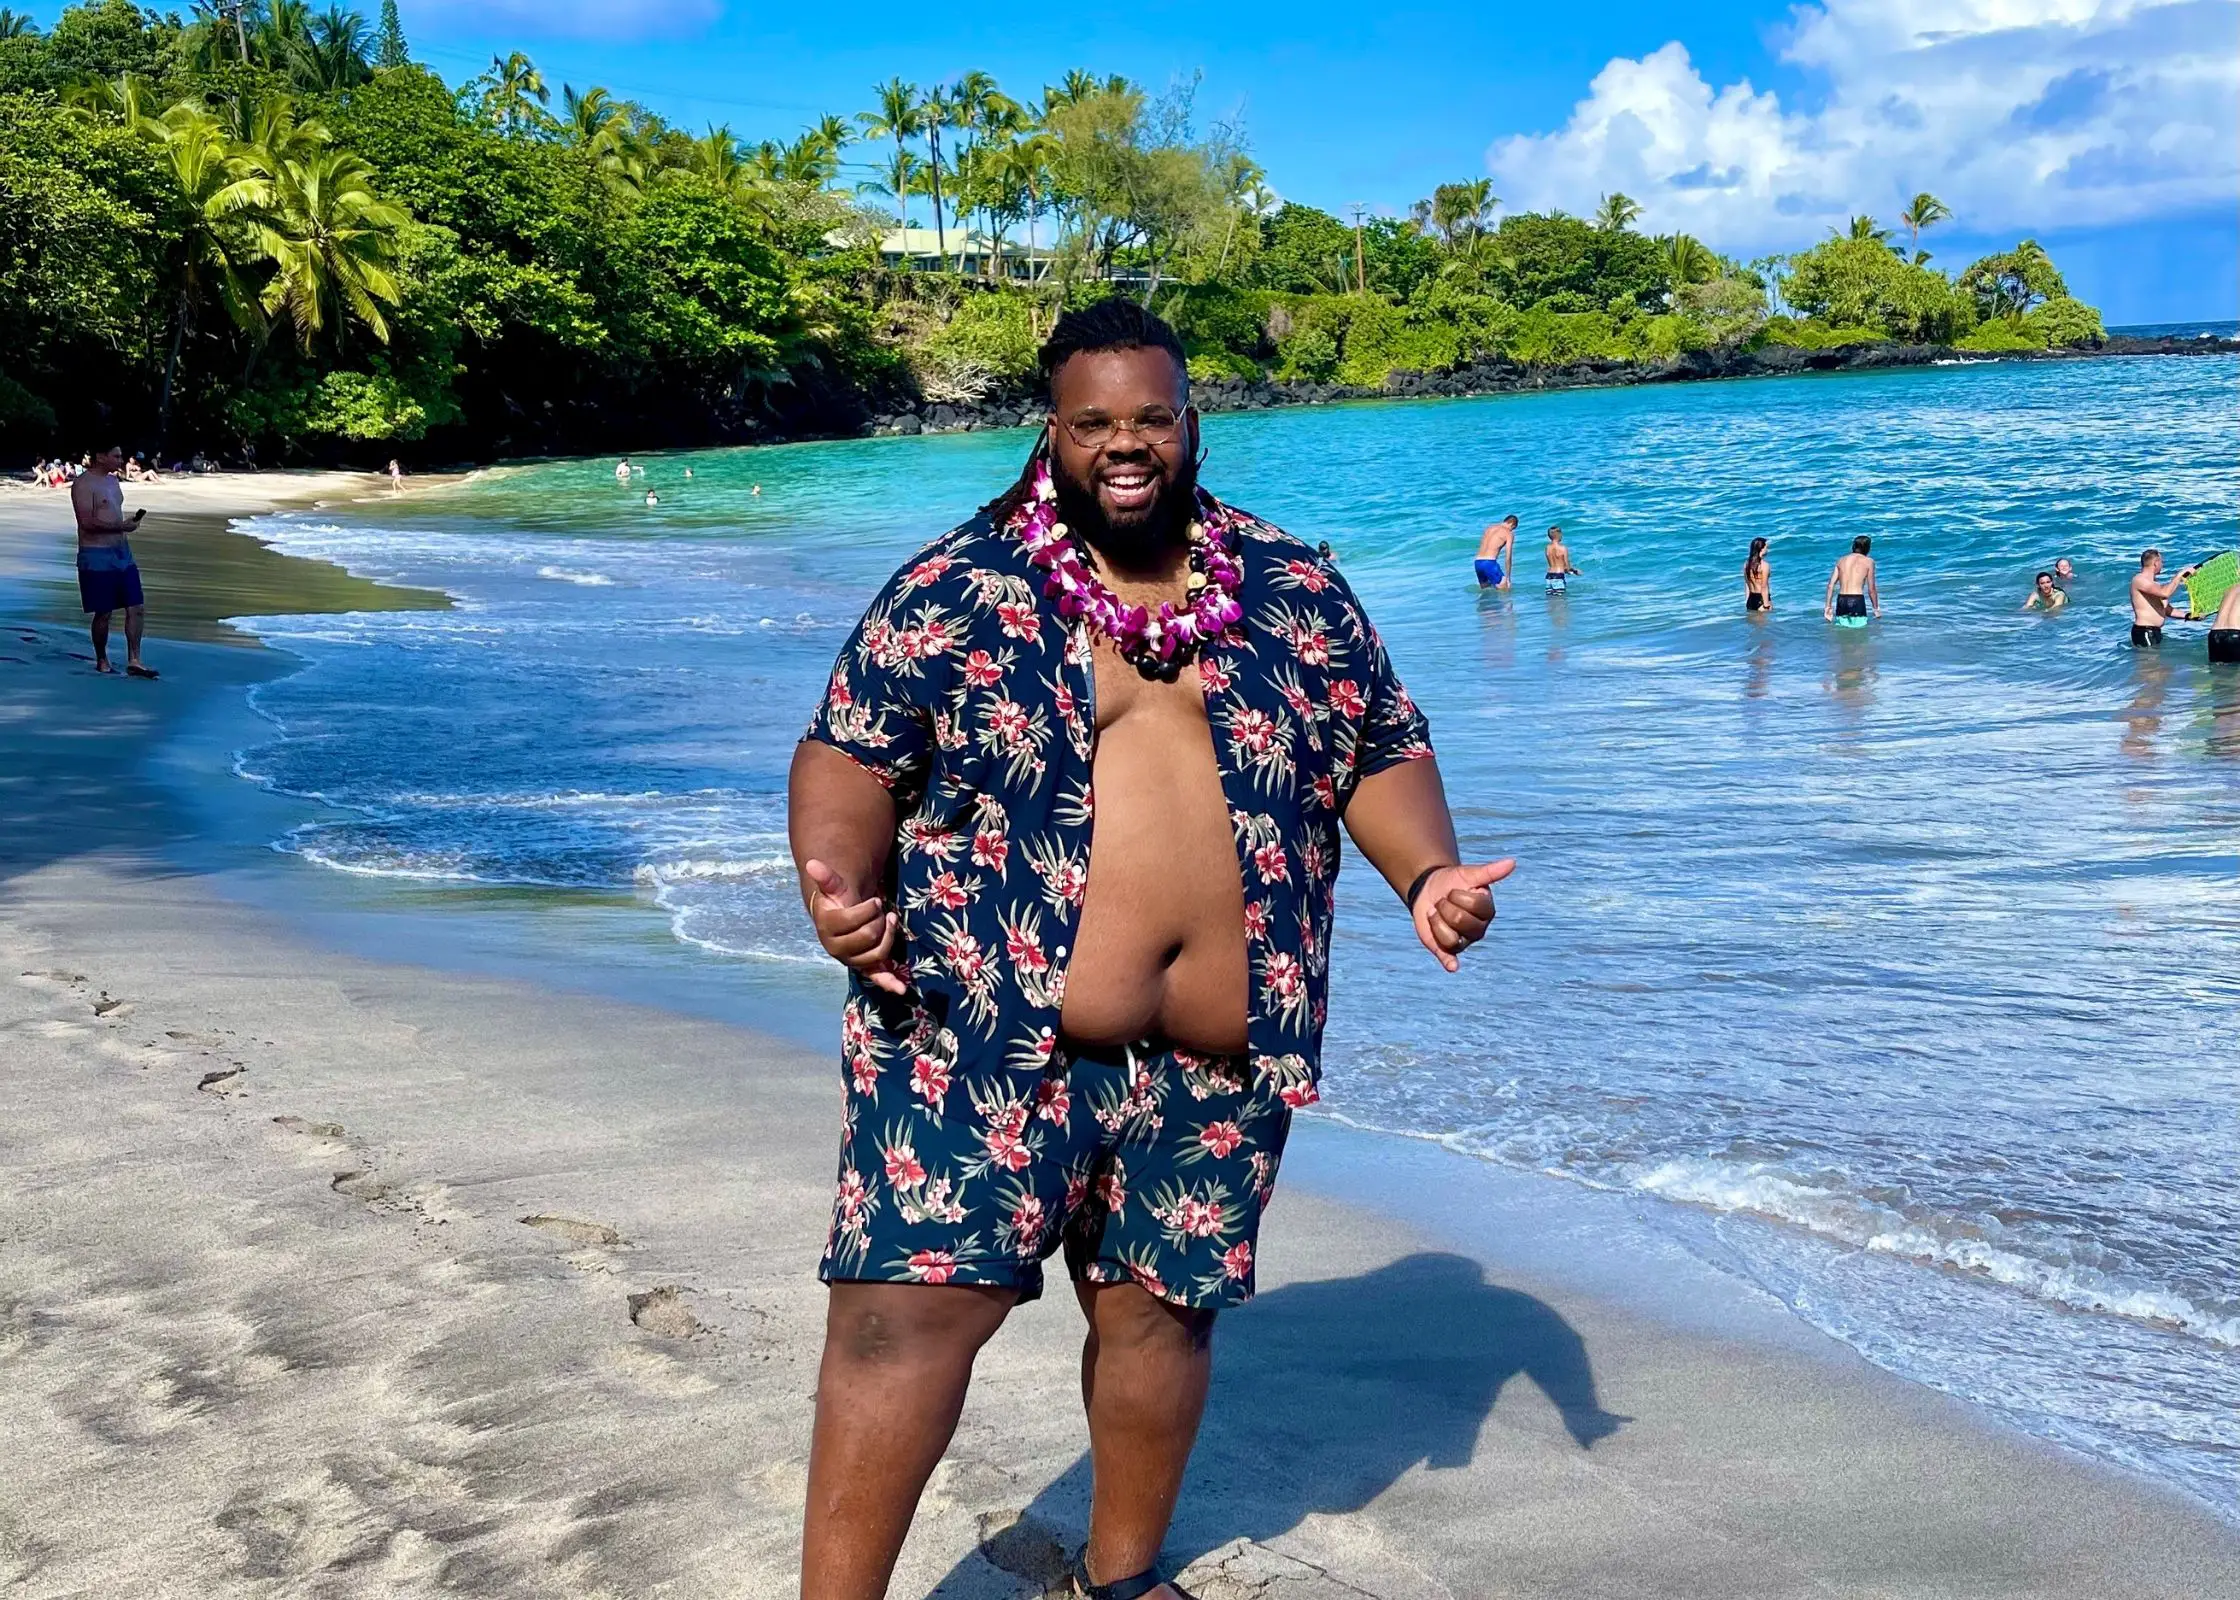 plus-size-travel-with-blogger-jeff-jenkins-of-chubby-diaries